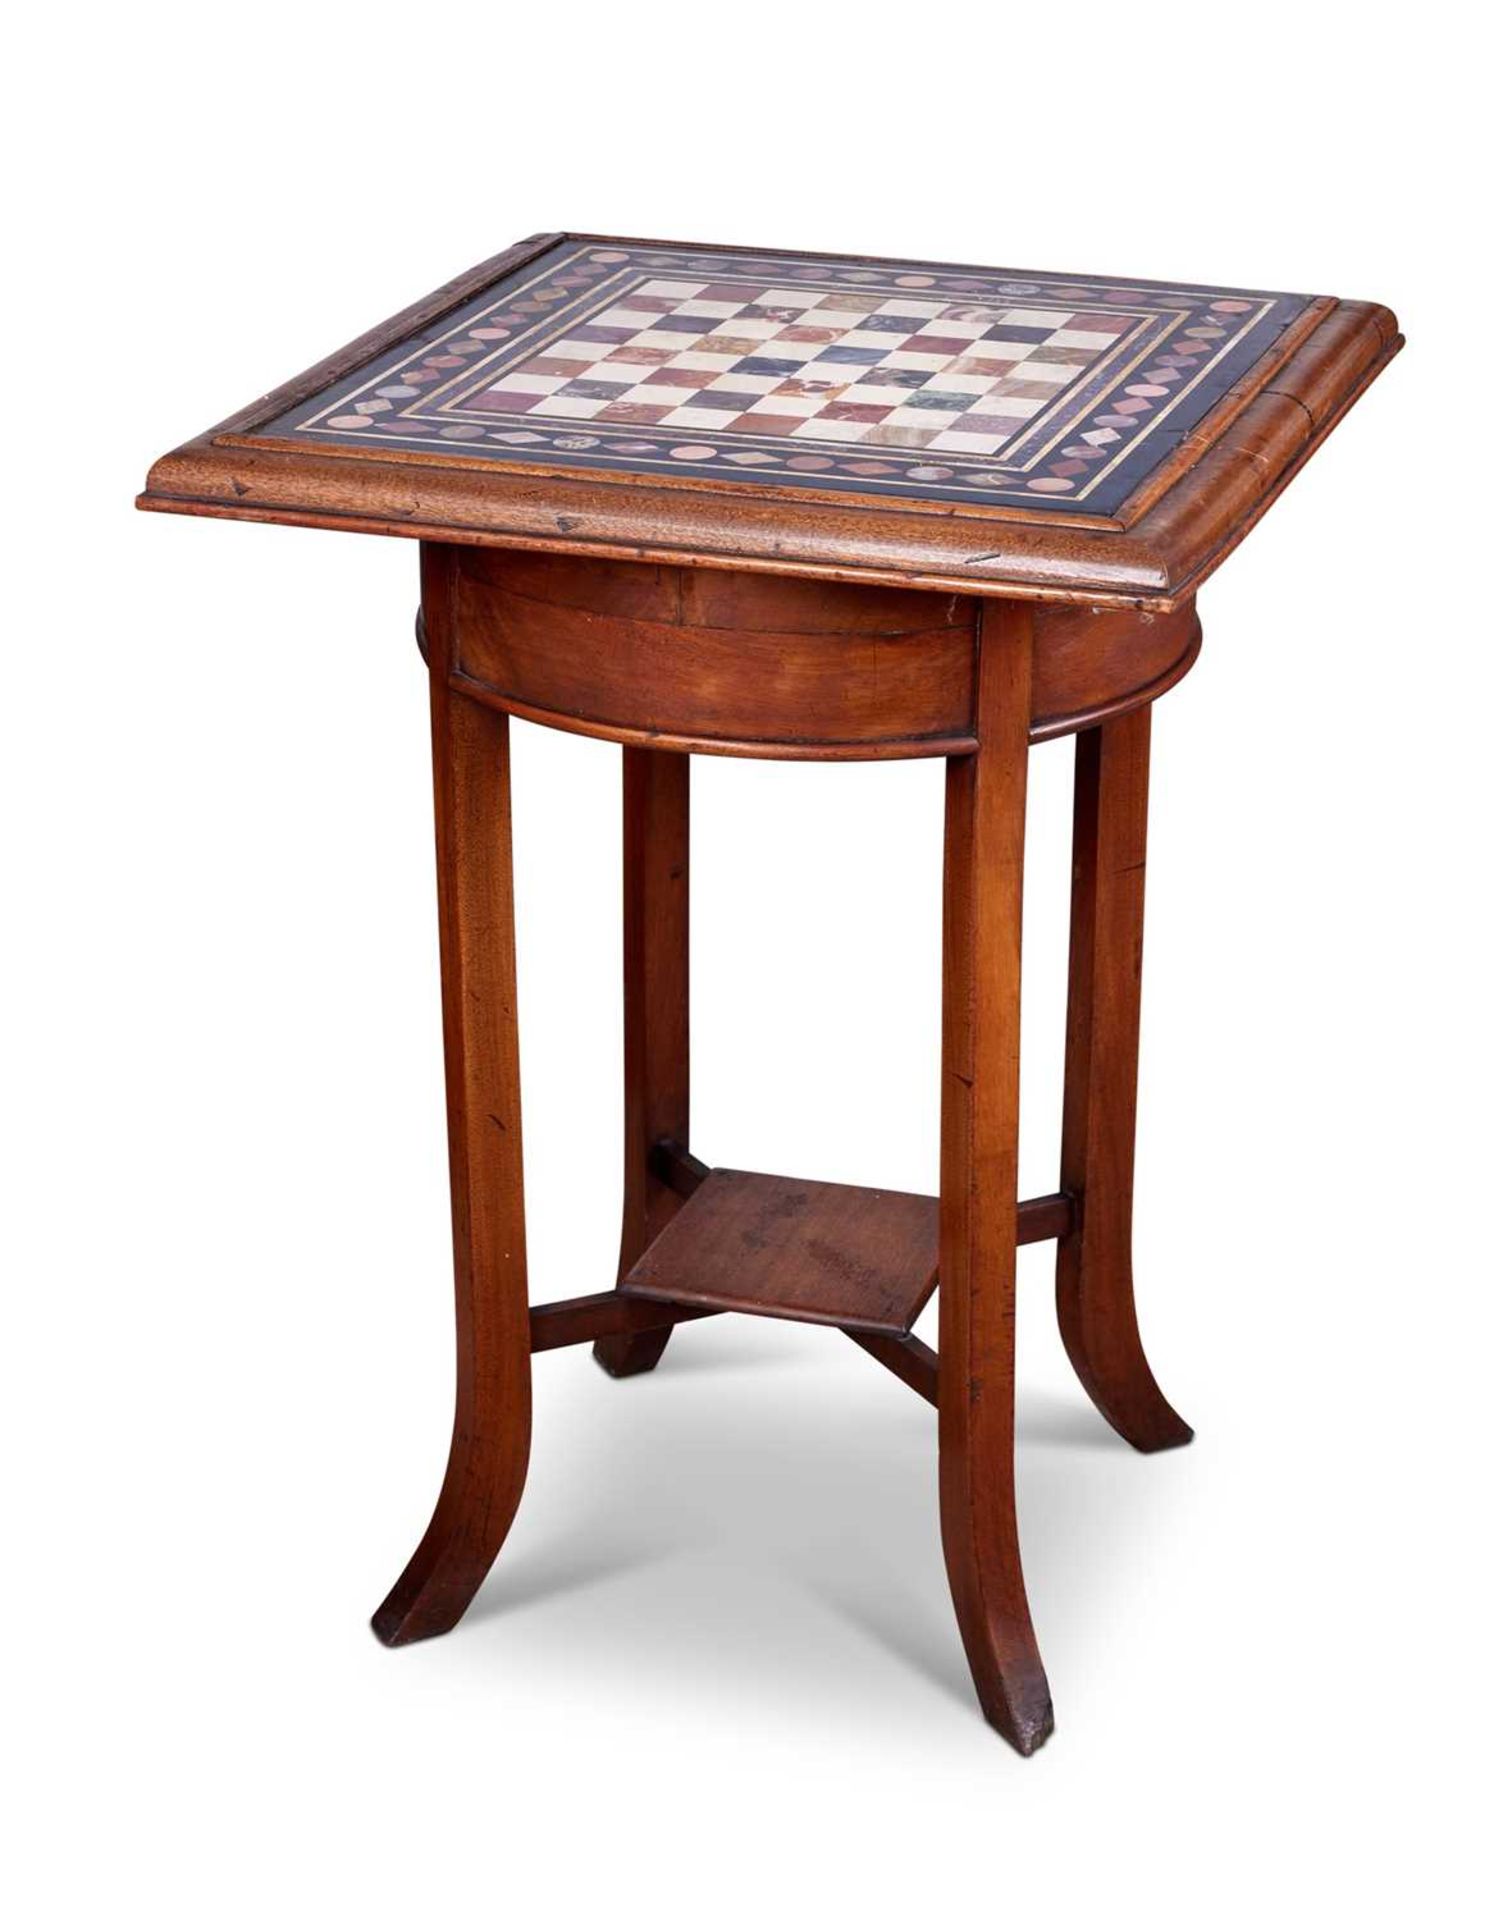 A SPECIMEN MARBLE INLAID GAMING TABLE